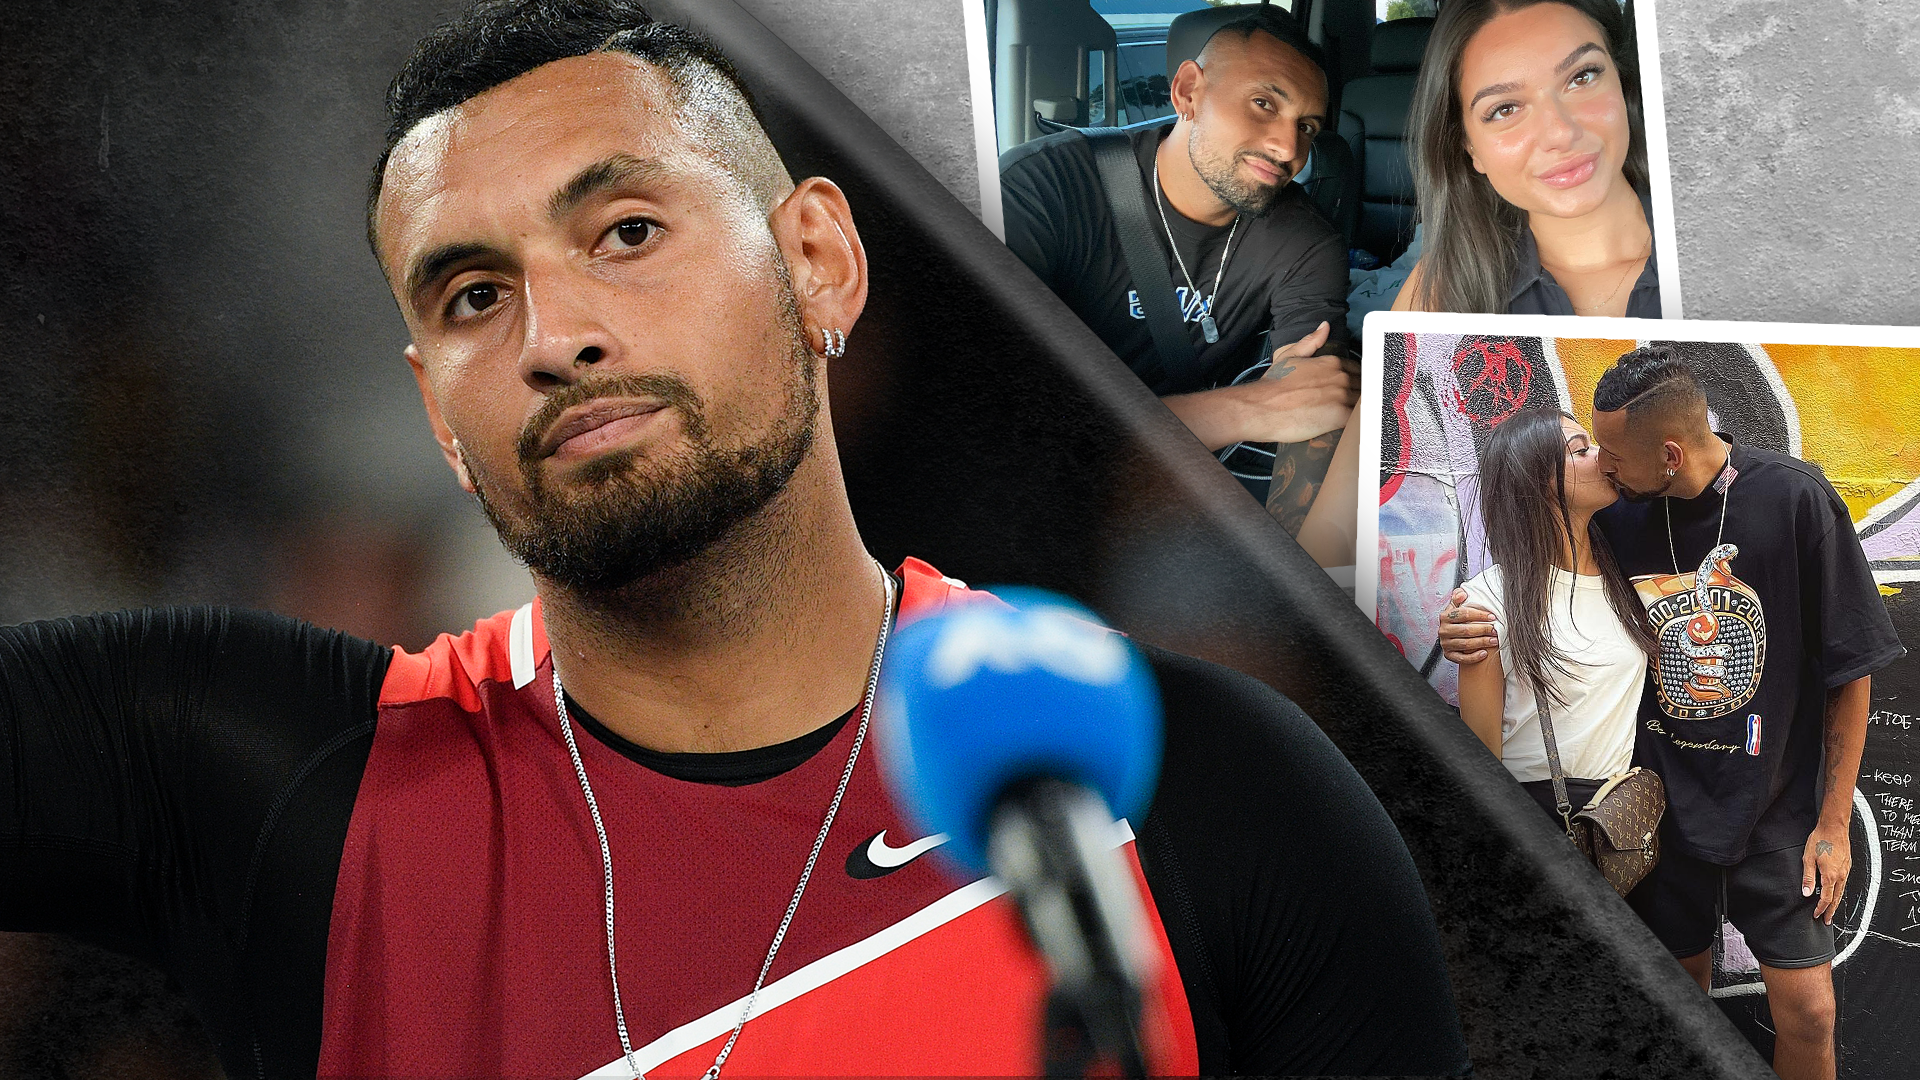 EXCLUSIVE: Dark times that led Nick Kyrgios to bury 'the crazy tennis player' who almost devoured him